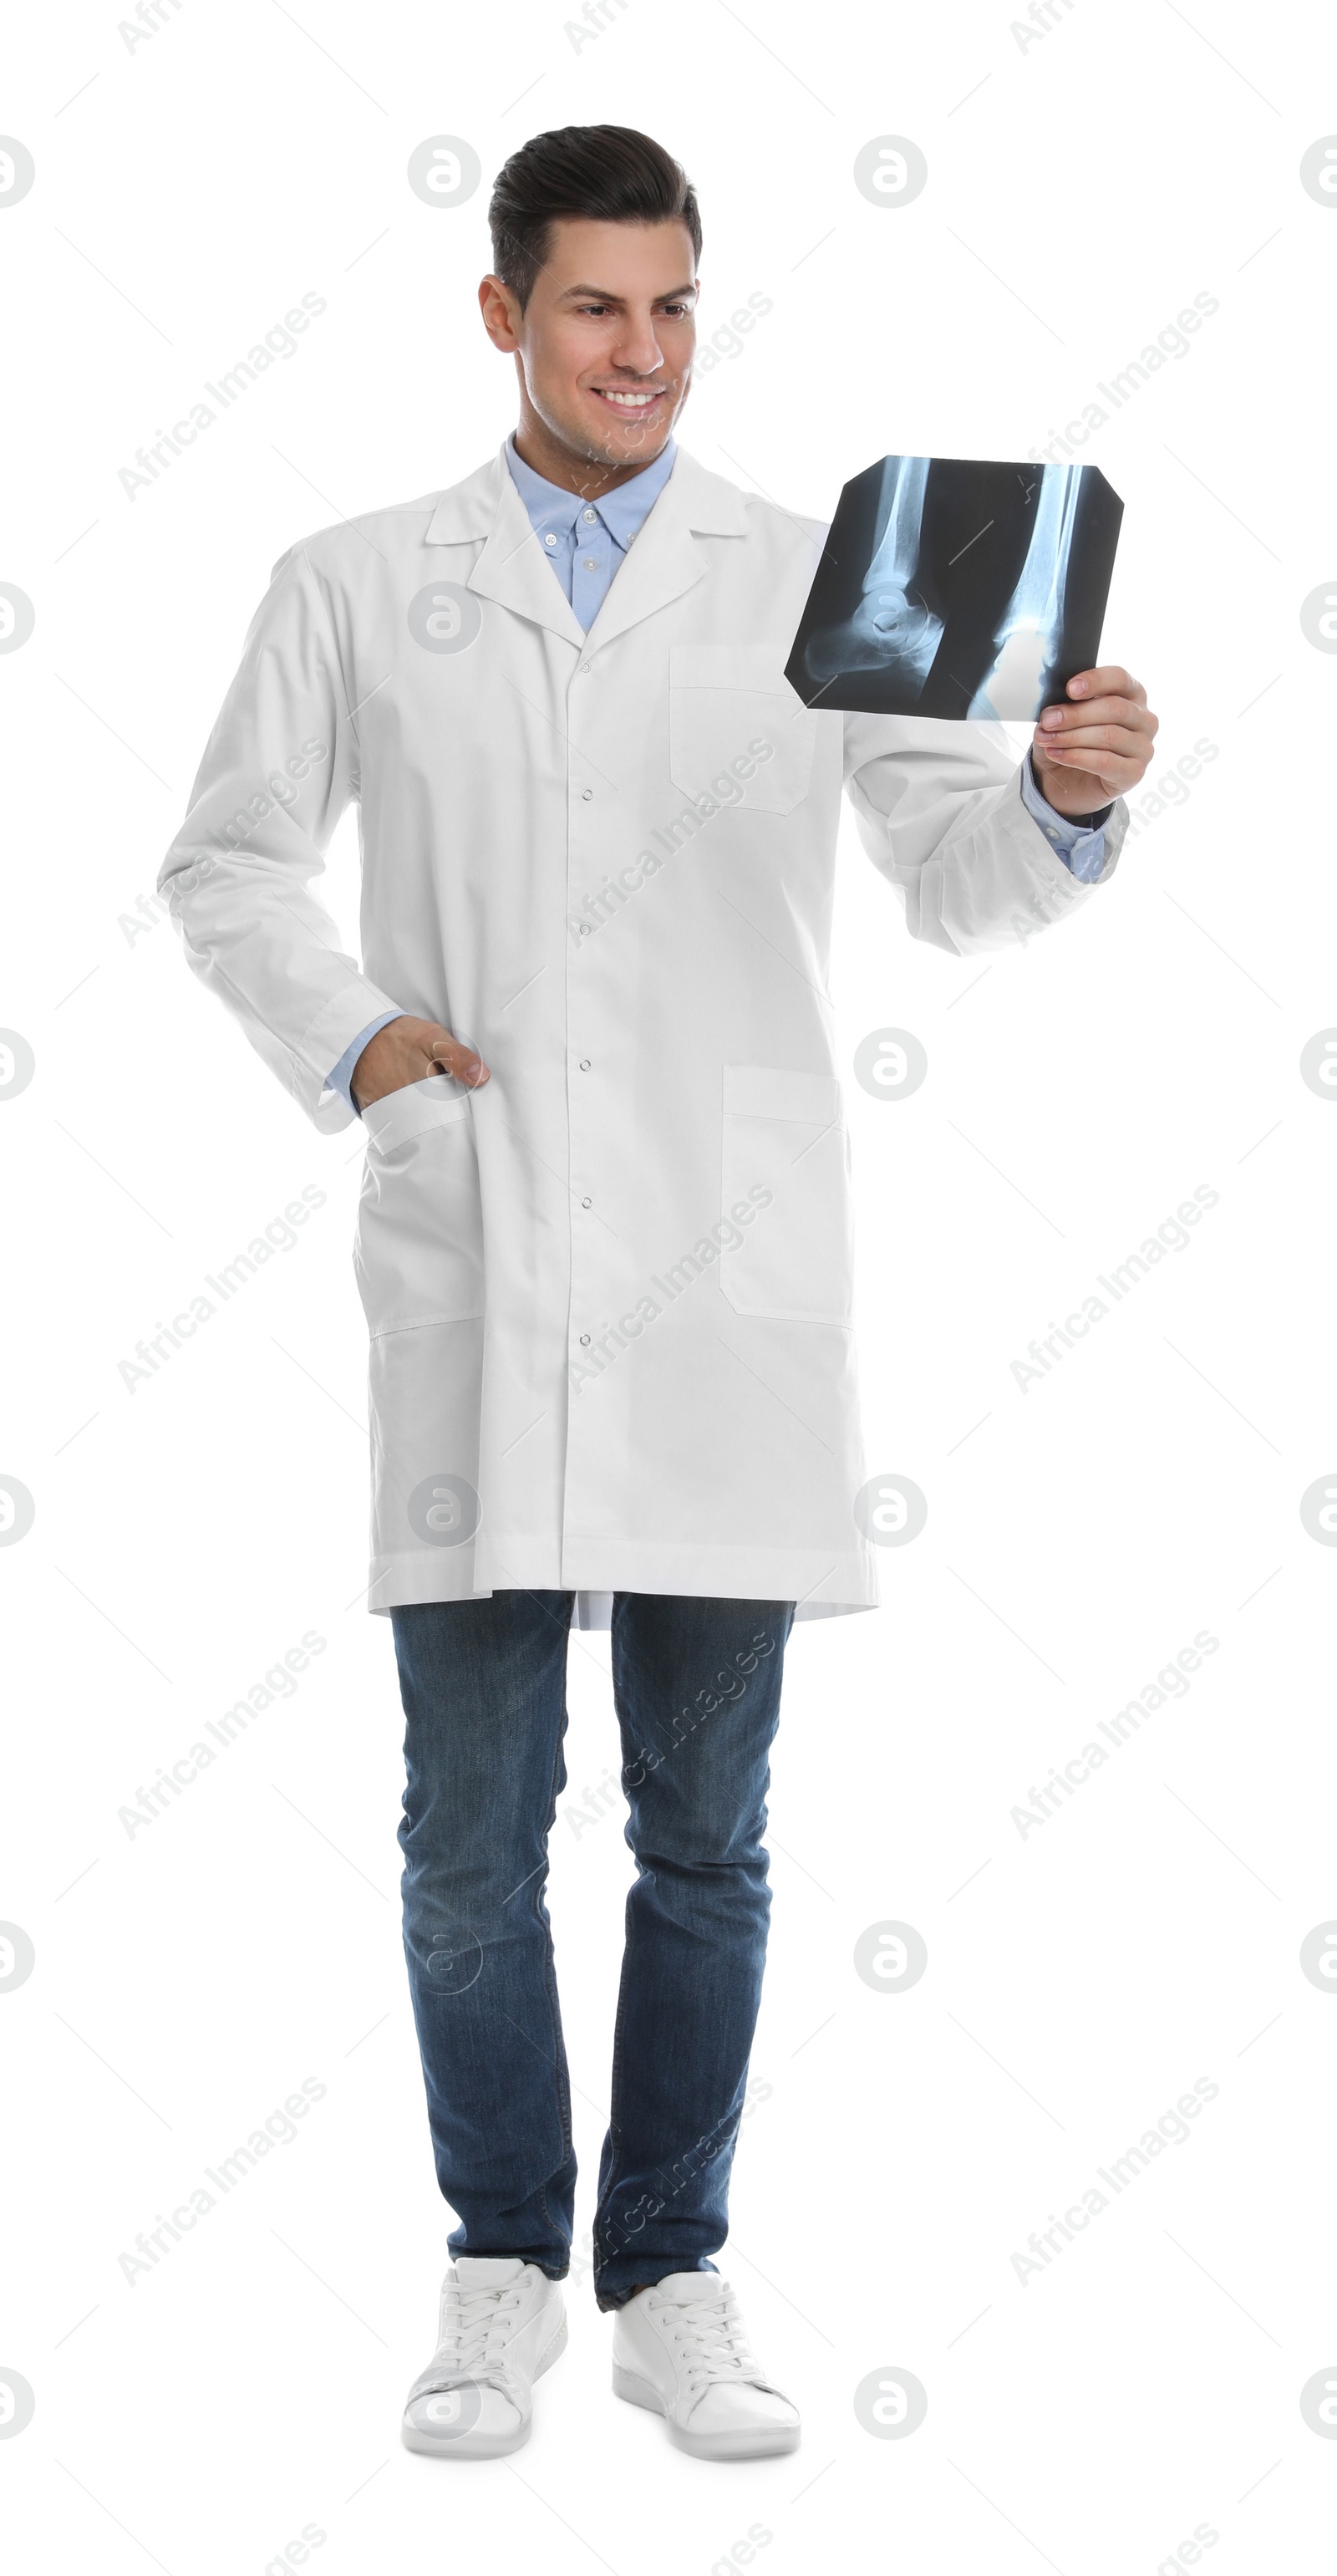 Photo of Orthopedist holding X-ray picture on white background